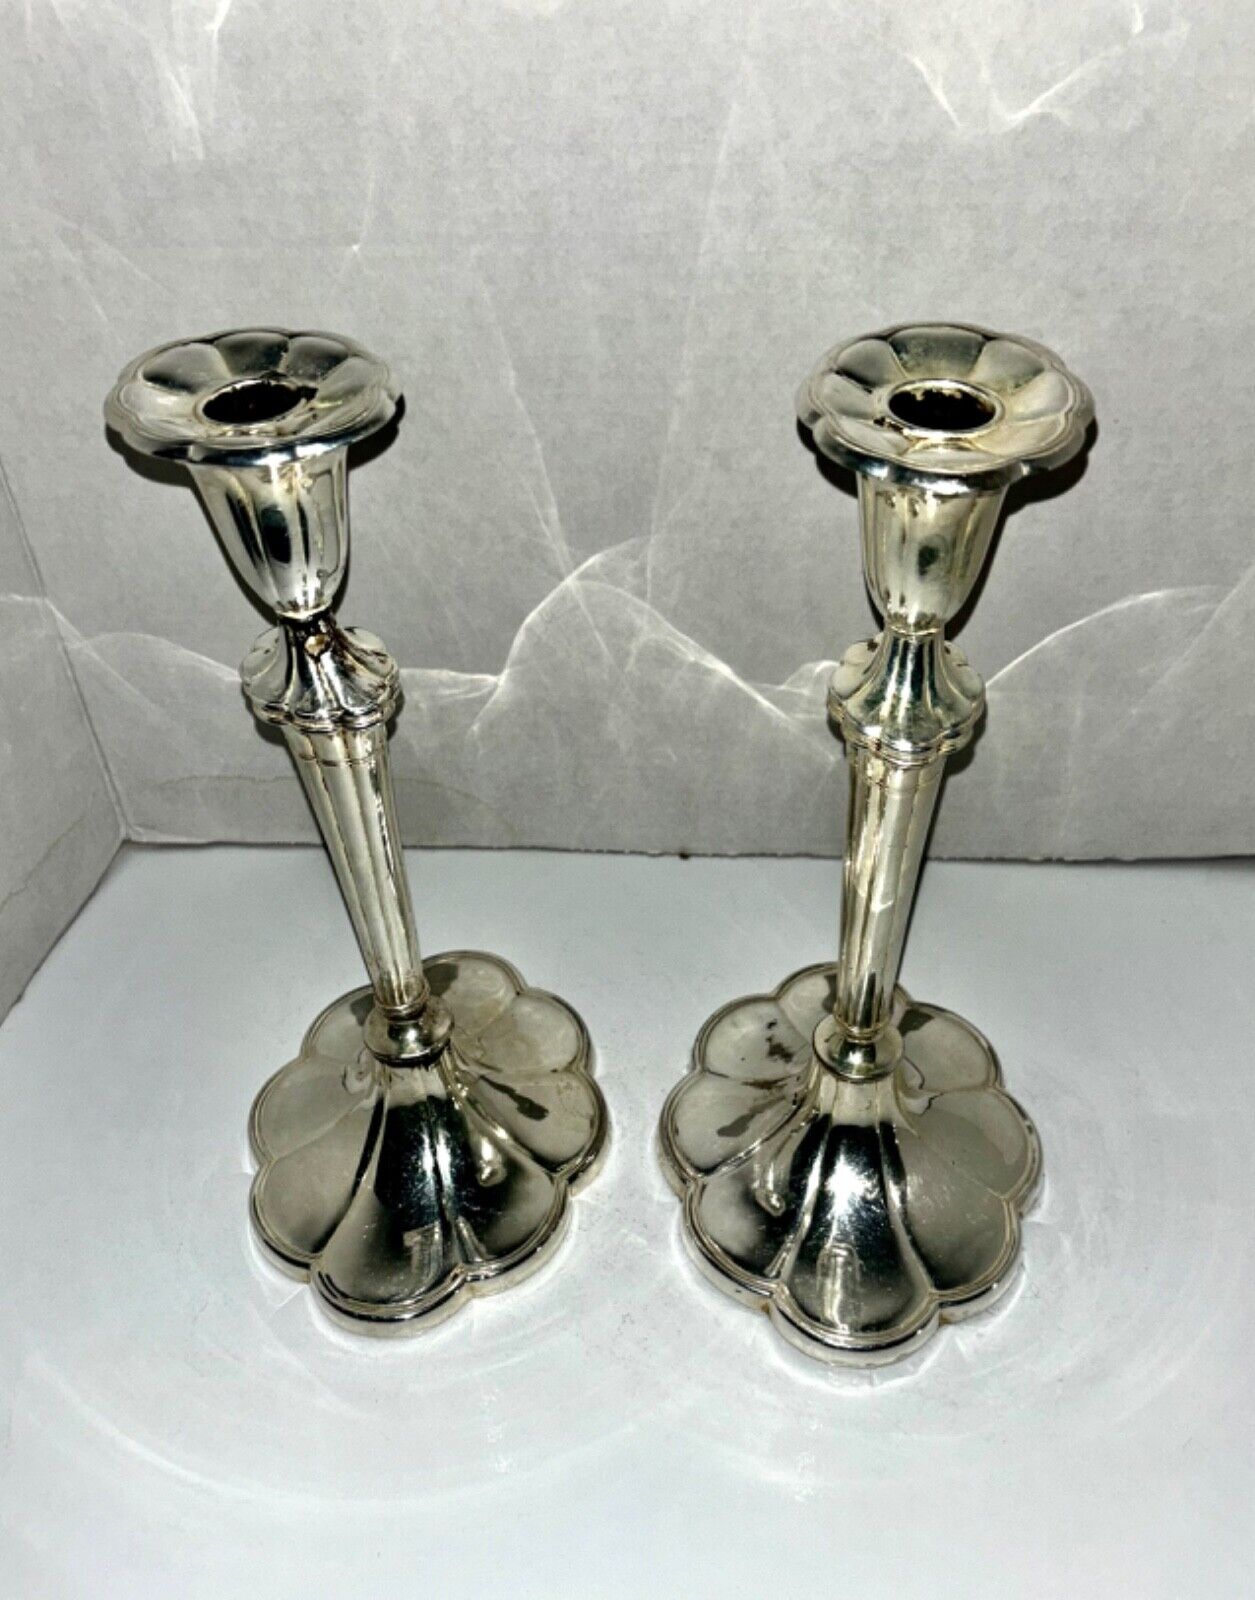 Pair of Antique Silver plate Candlesticks by Barbour Silver England